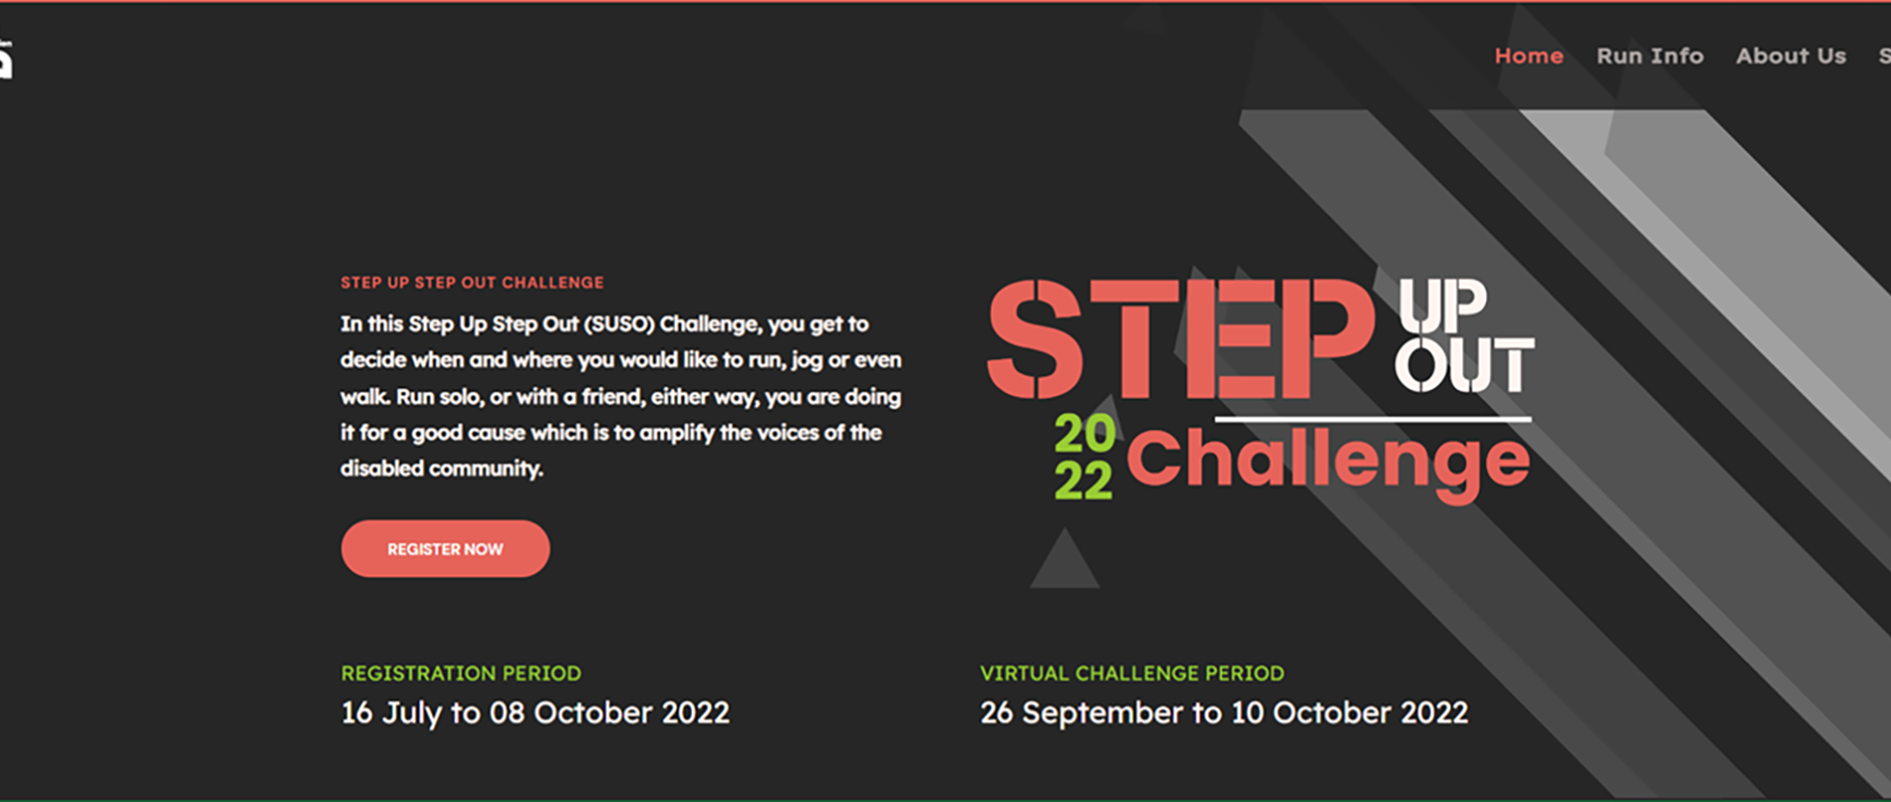 Step Up Step Out Challenge